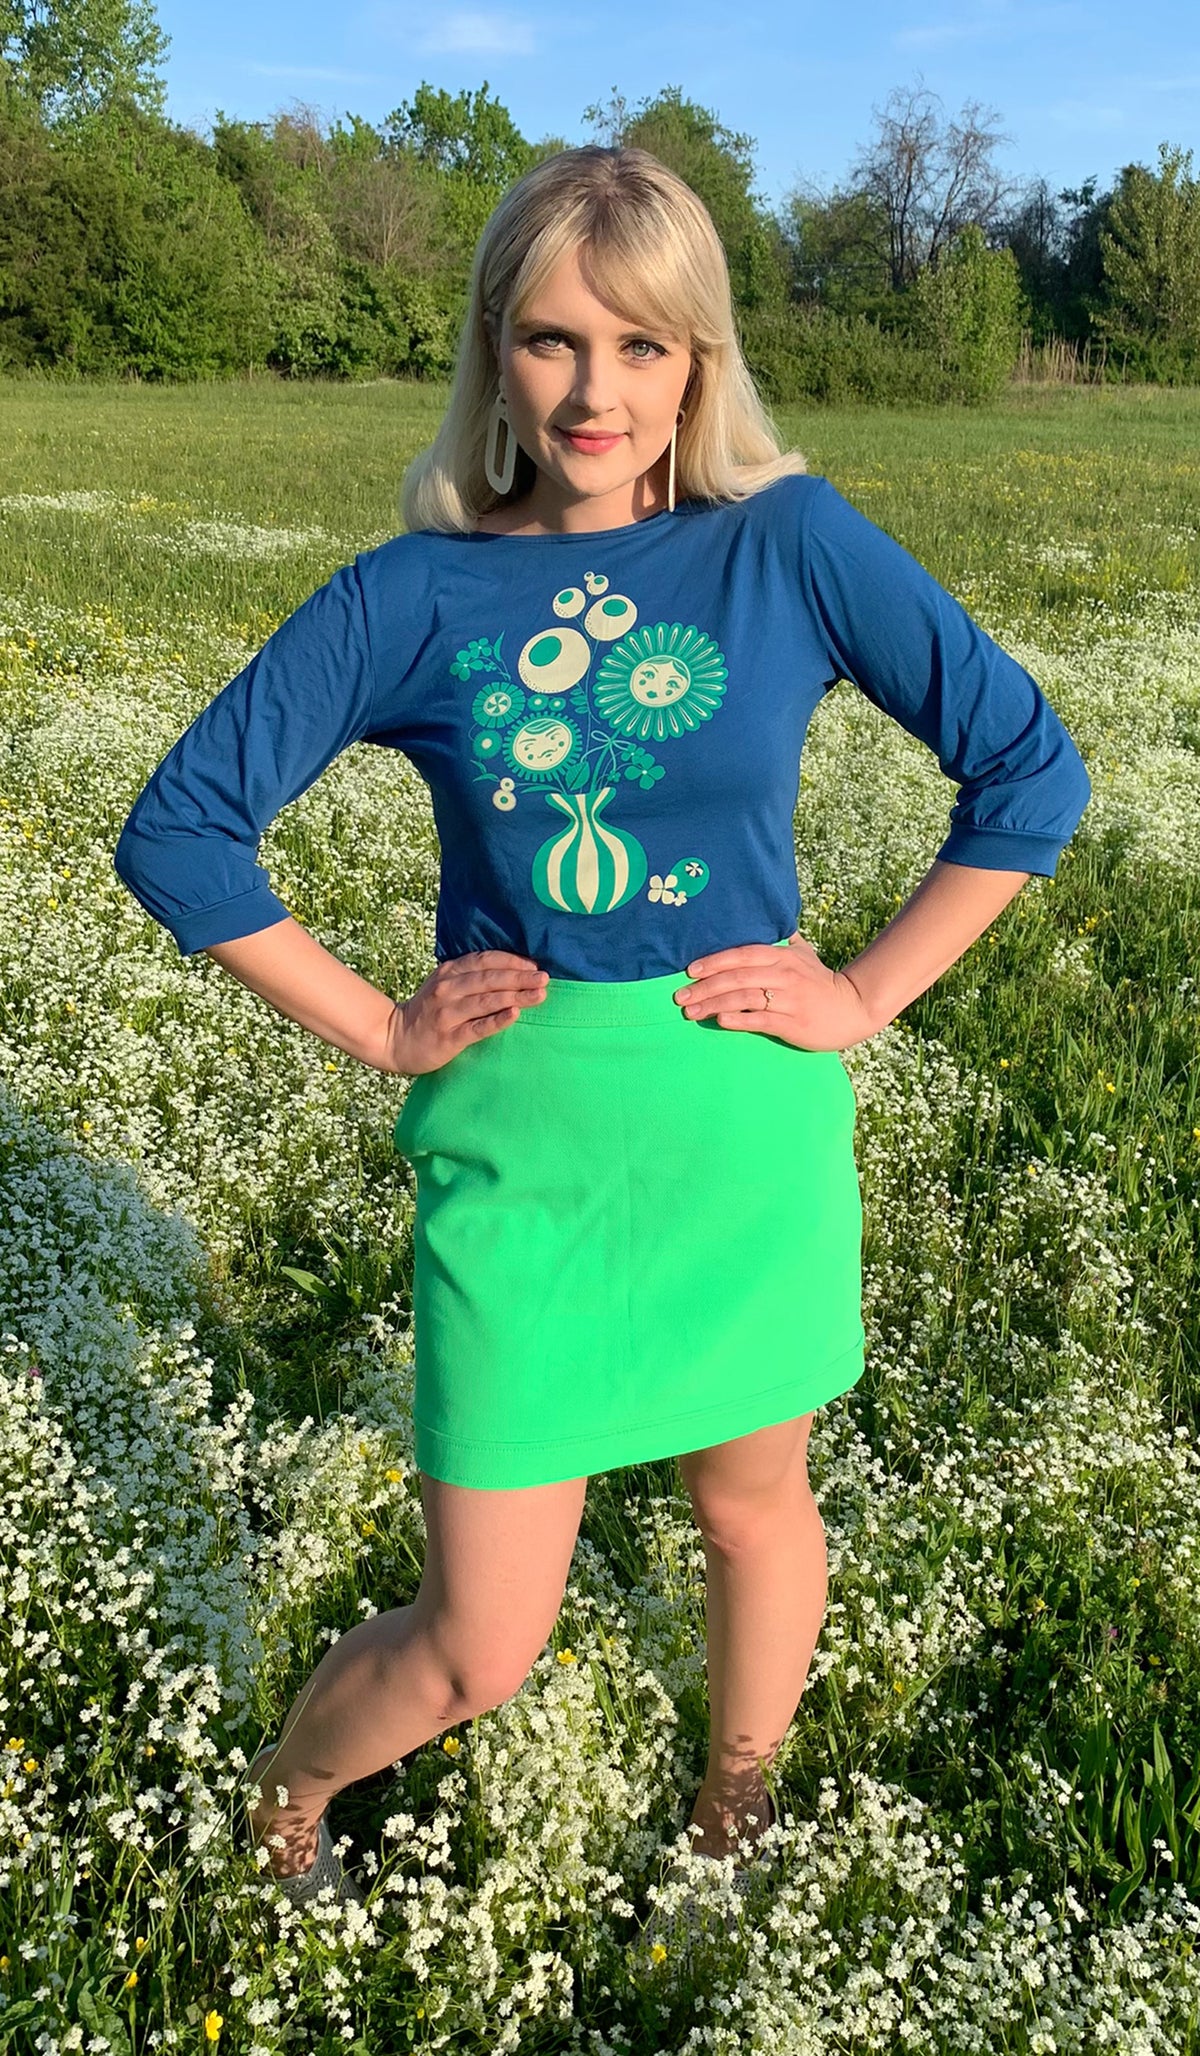 Cornflower blue boatneck tee with emerald green and white vintage vase of flowers design on pretty blonde model in a field of flowers